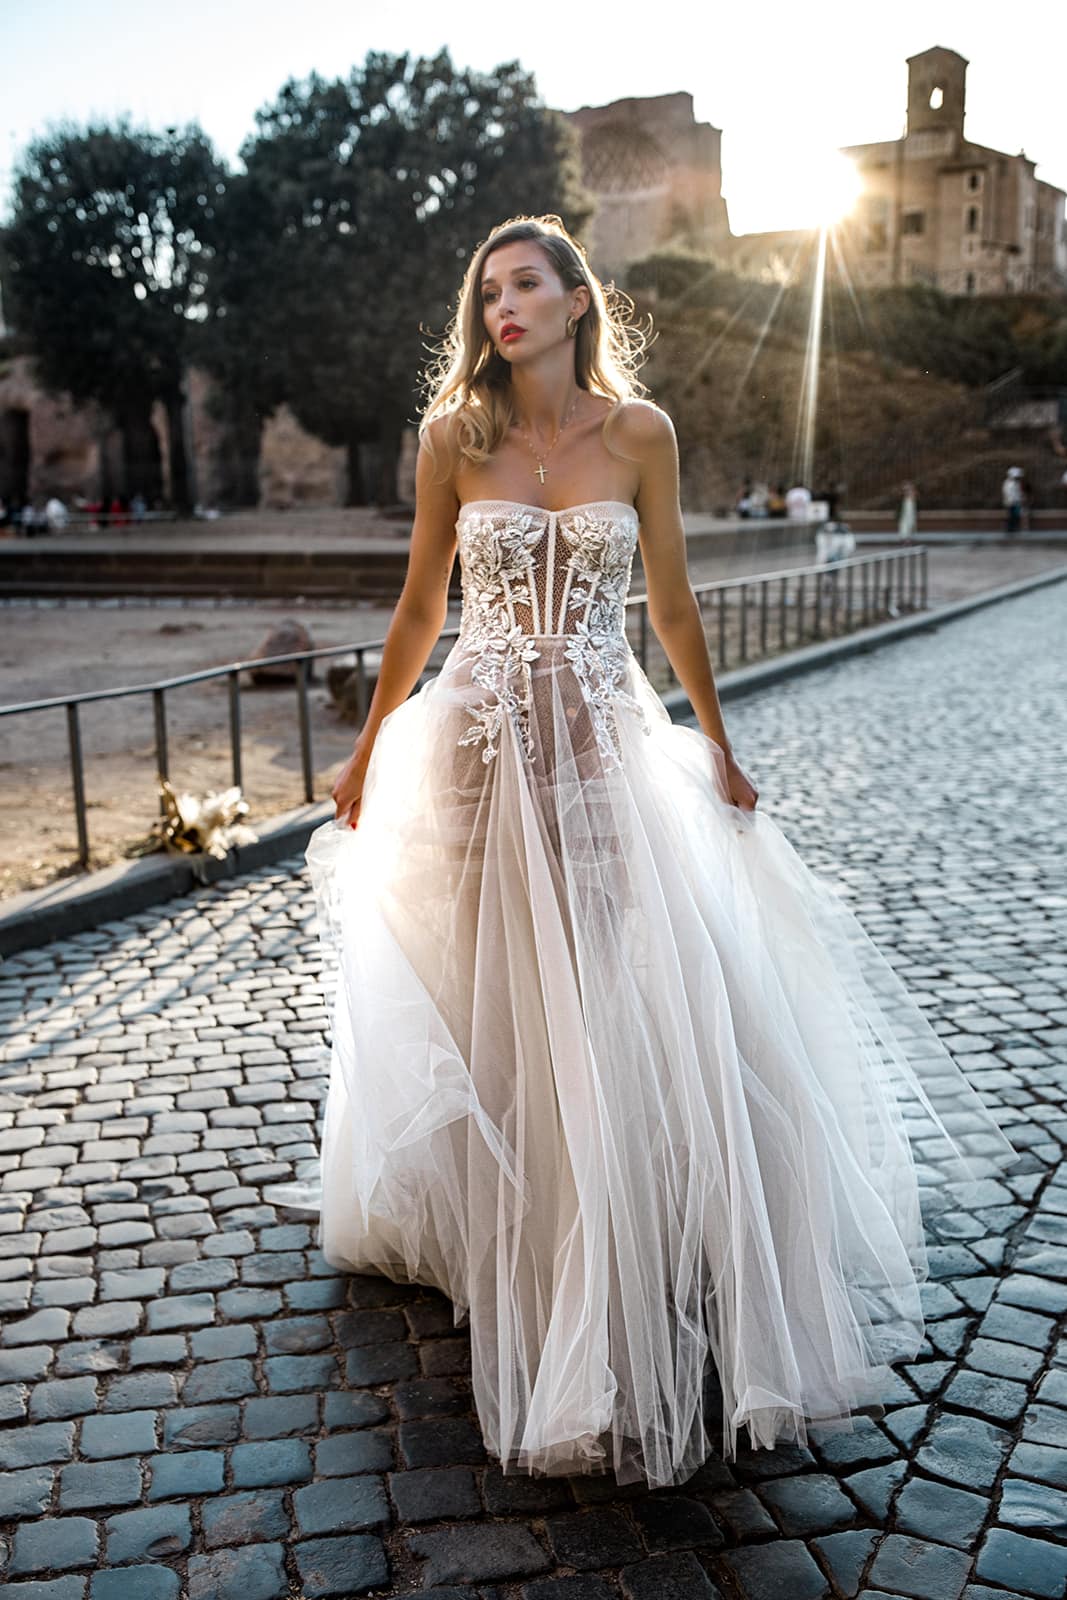 Bride walks cobblestone streets in Rome, Italy after Rome elopement